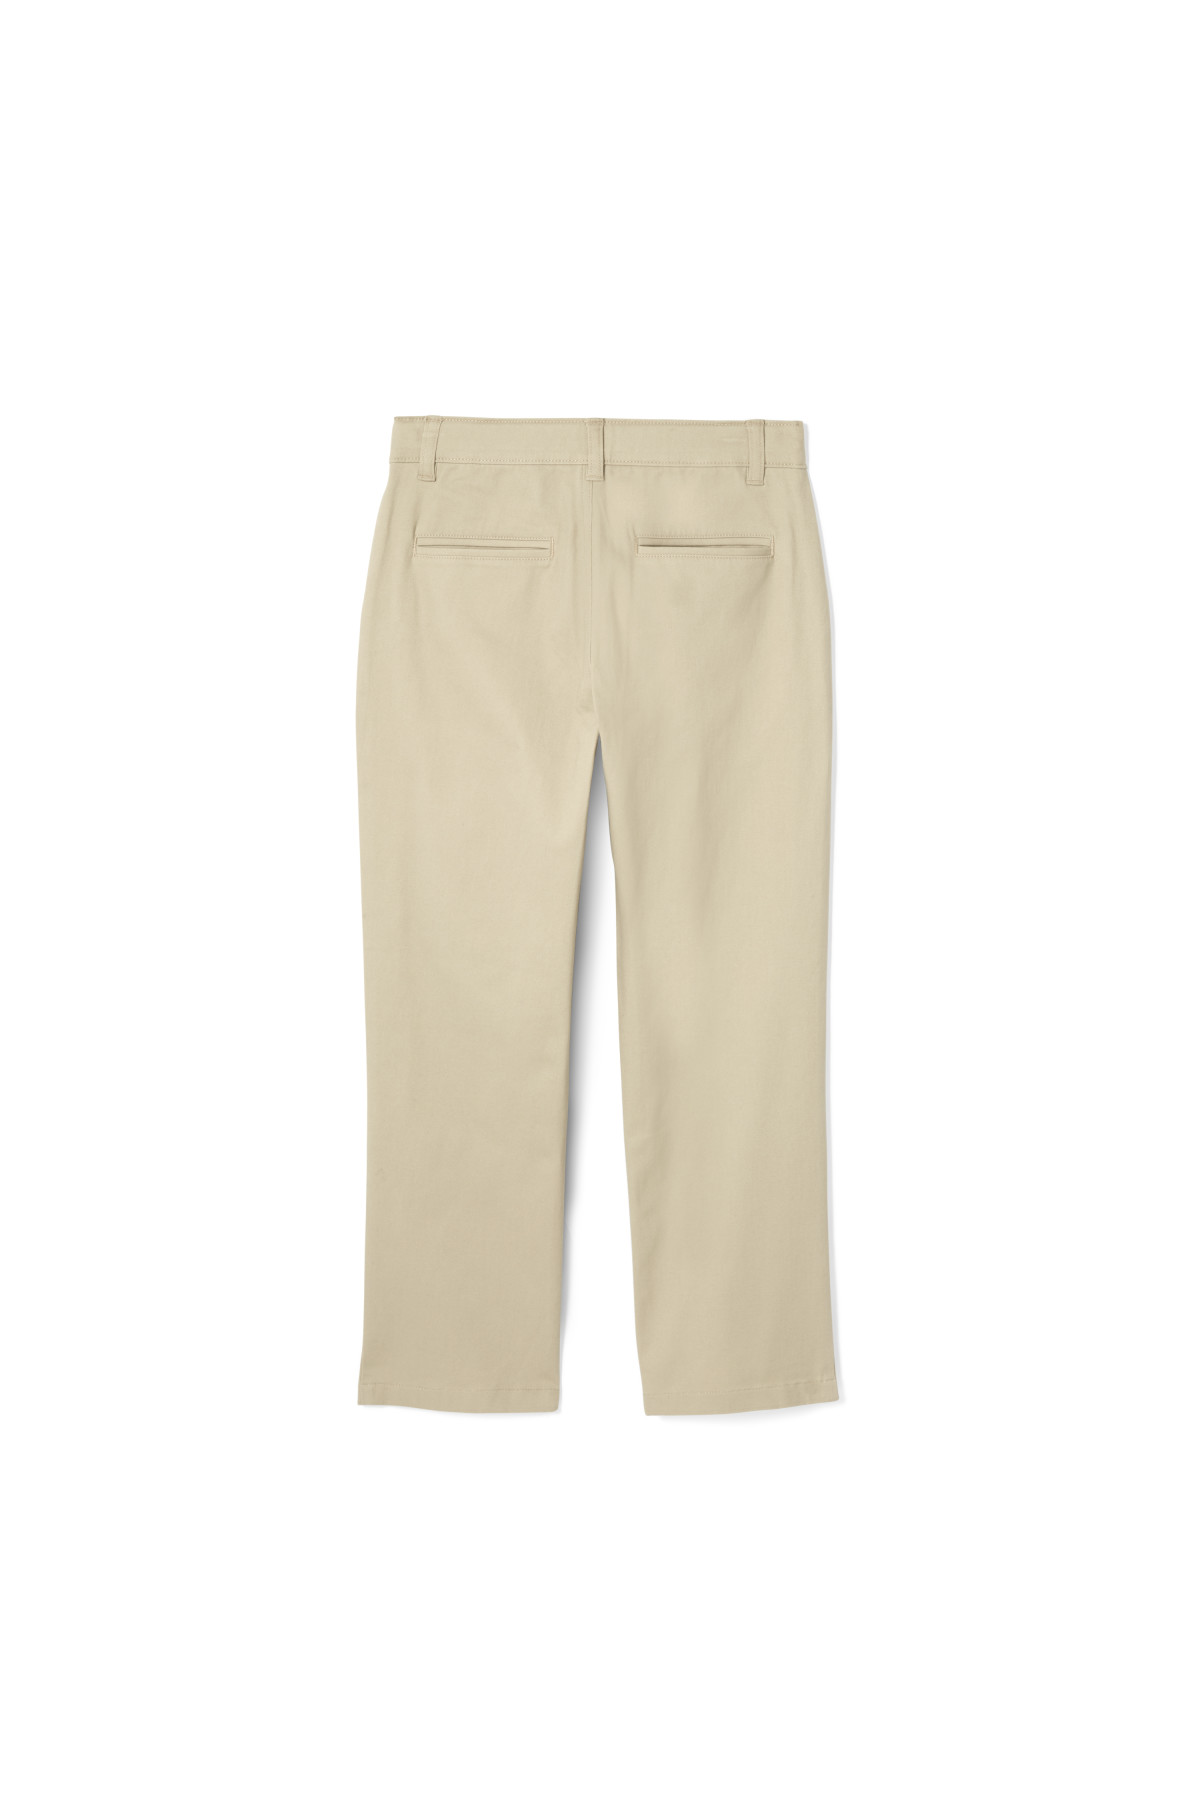 French Toast girls Pull-on Twill Pant Standard & Plus 